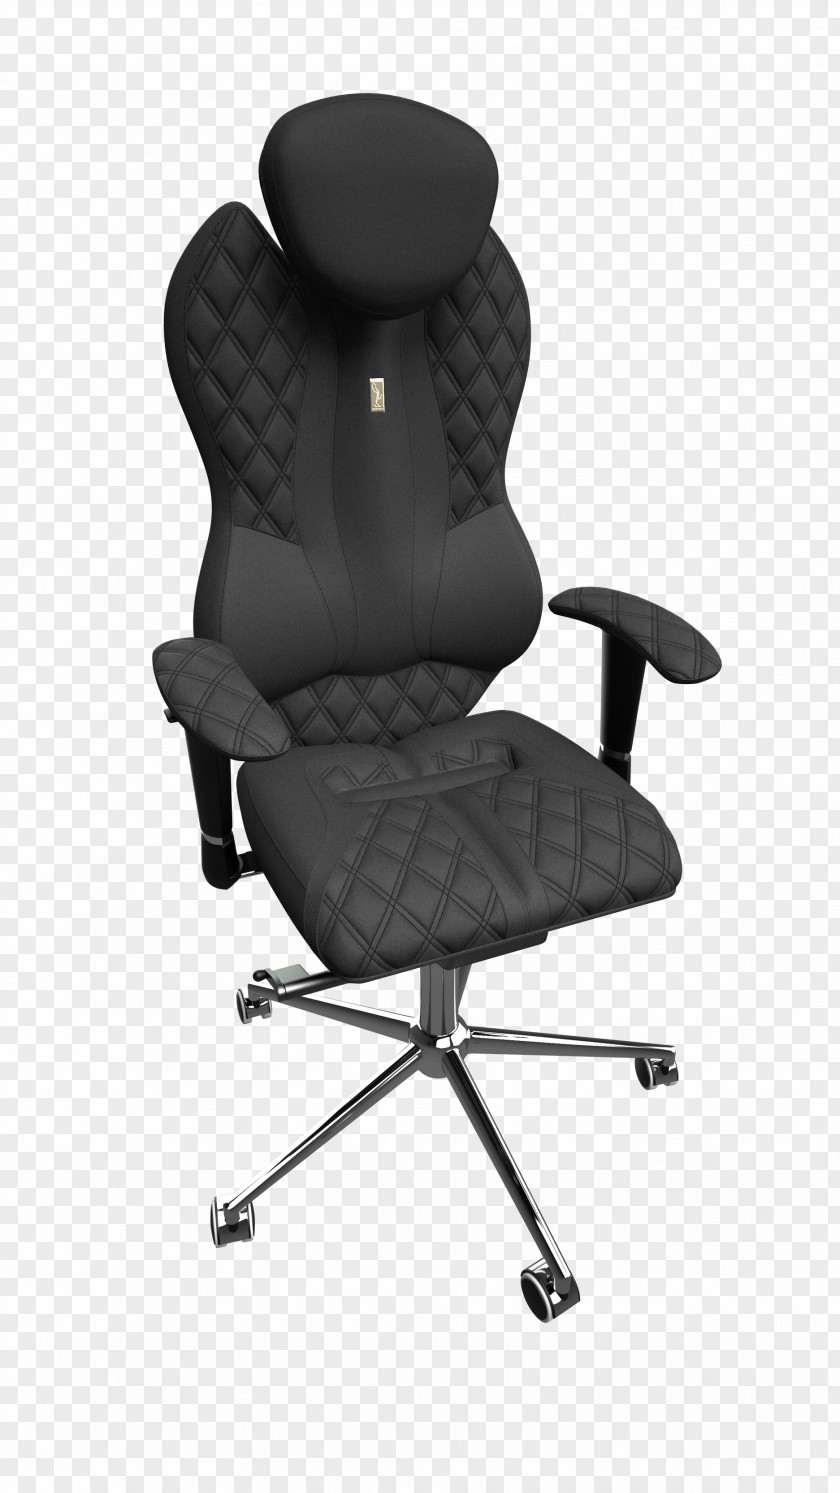 Chair Office & Desk Chairs Wing Furniture Eames Lounge PNG